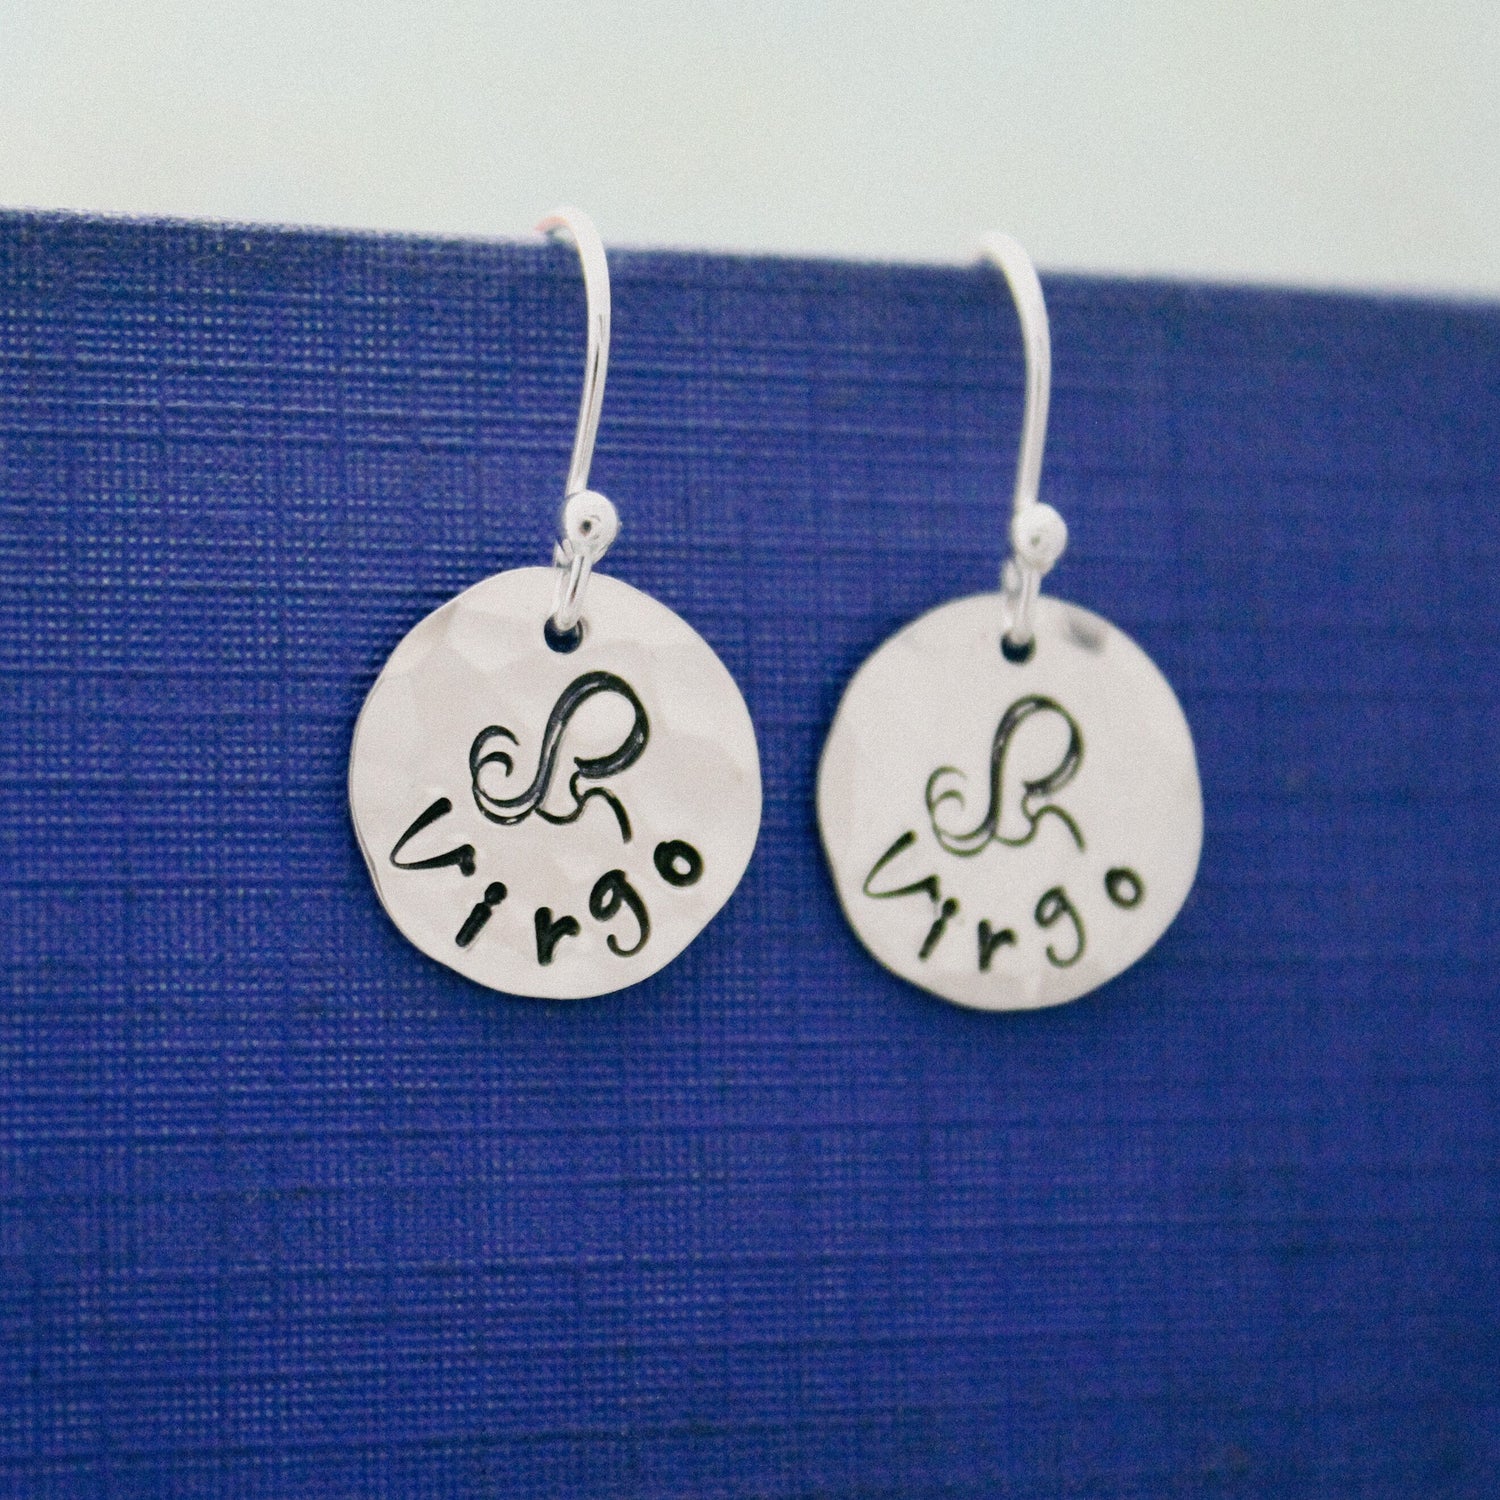 Virgo Sterling Silver Earrings, Virgo Zodiac Sign Jewelry, Hand Stamped Witchy Earrings, Virgo Zodiac Jewelry Unique Gift for Her, Virgo